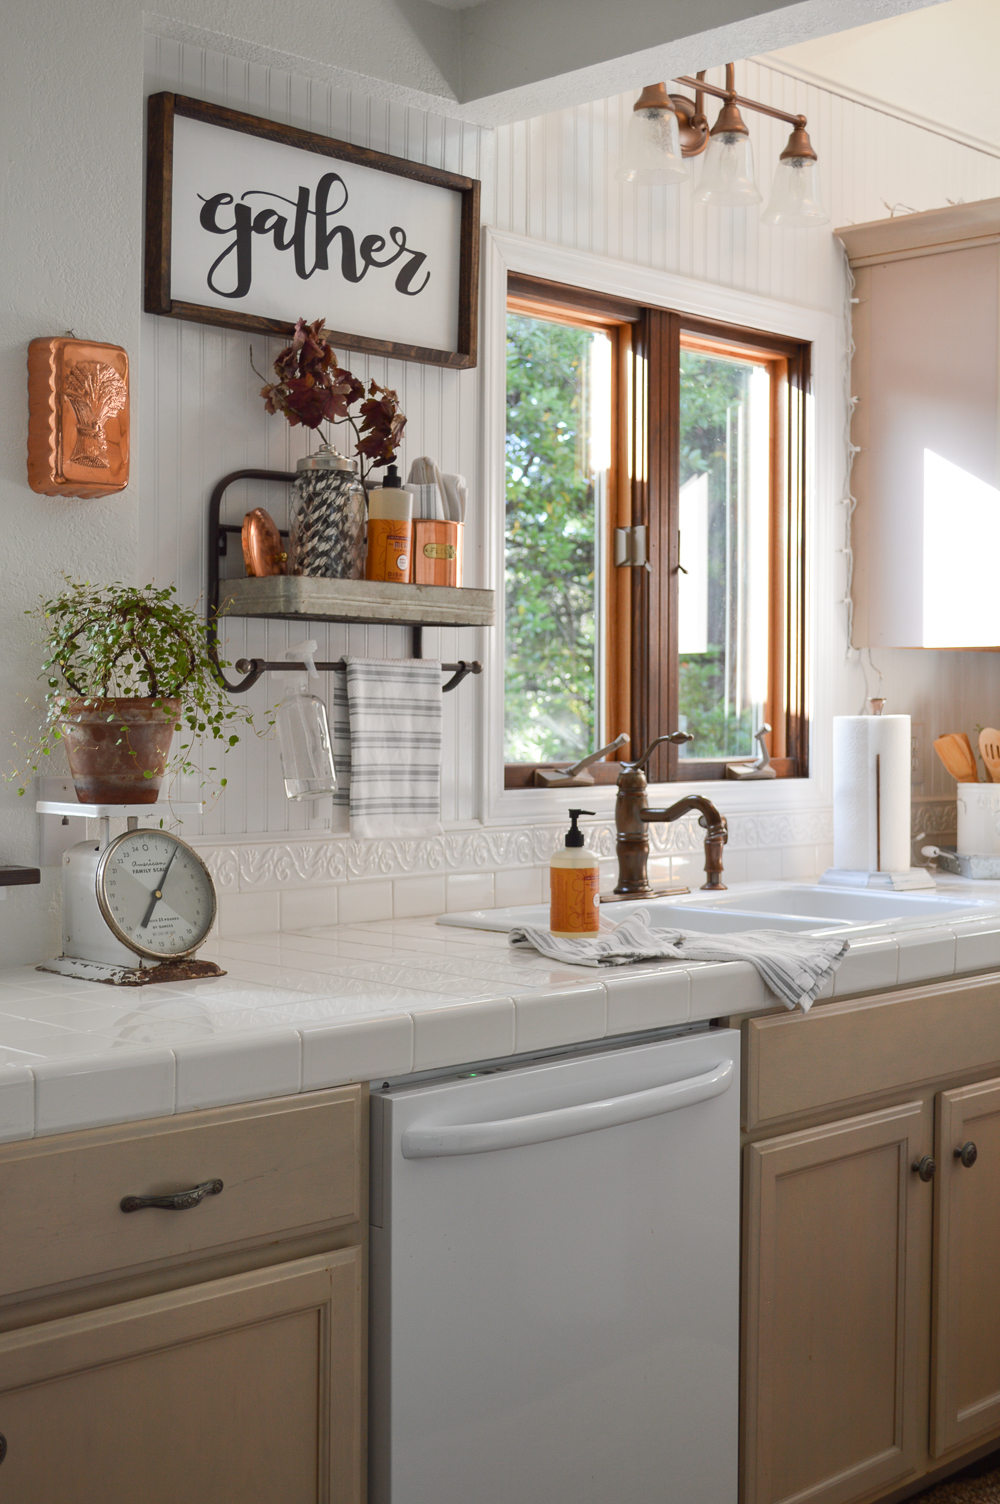  Fall  Vintage Kitchen  Decorating Fox Hollow Cottage